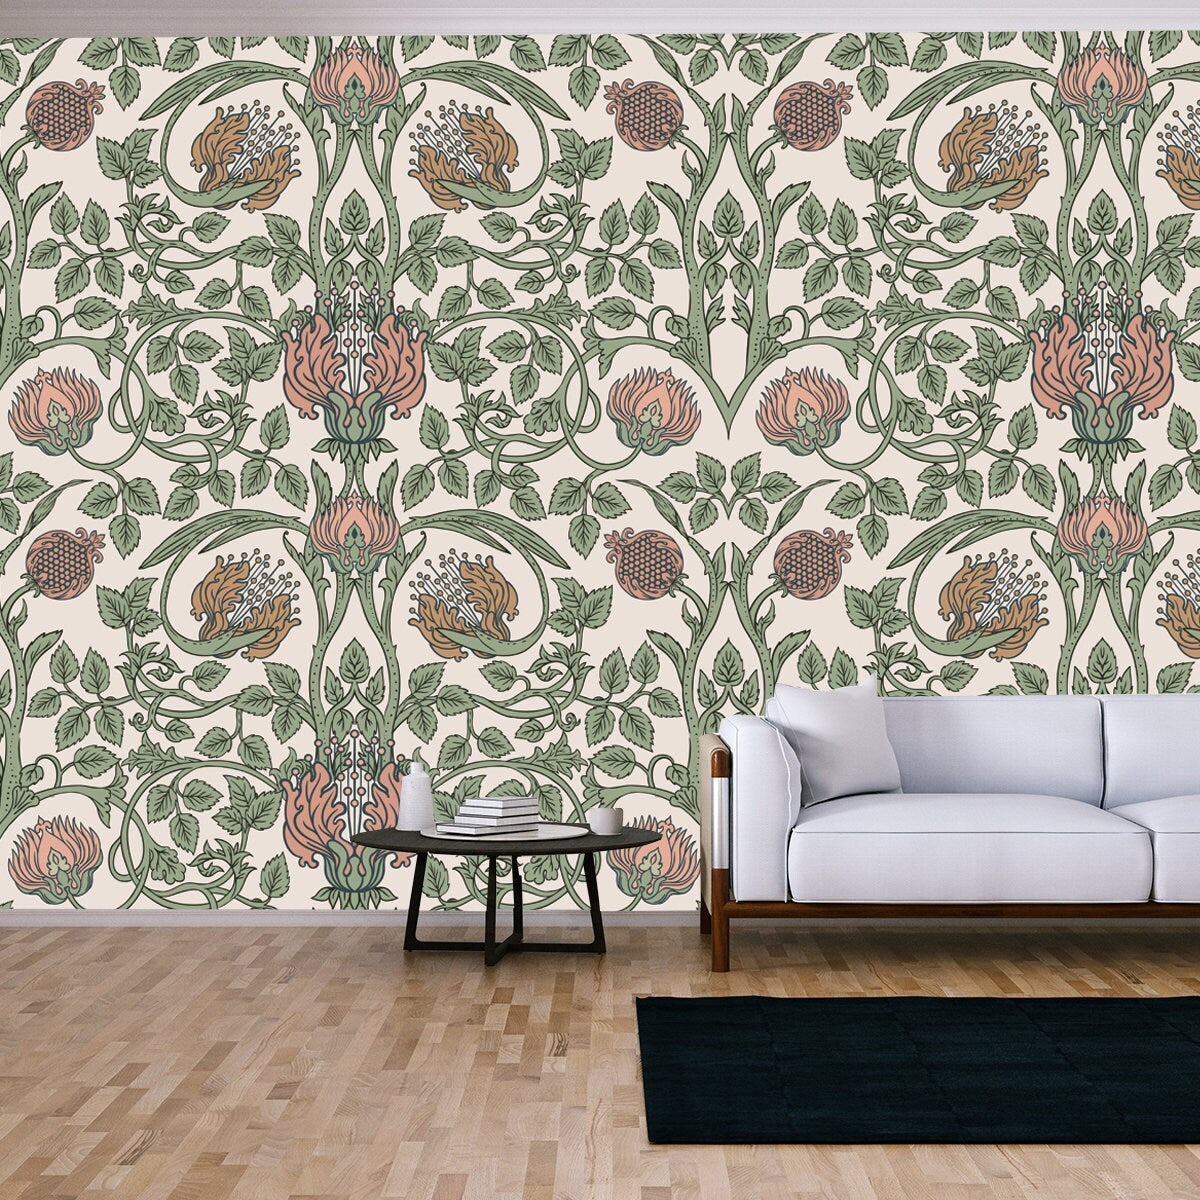 Floral Vintage Seamless Pattern for Retro Wallpapers. Enchanted Vintage Flowers. Arts and Crafts Movement Inspired Living Room Mural